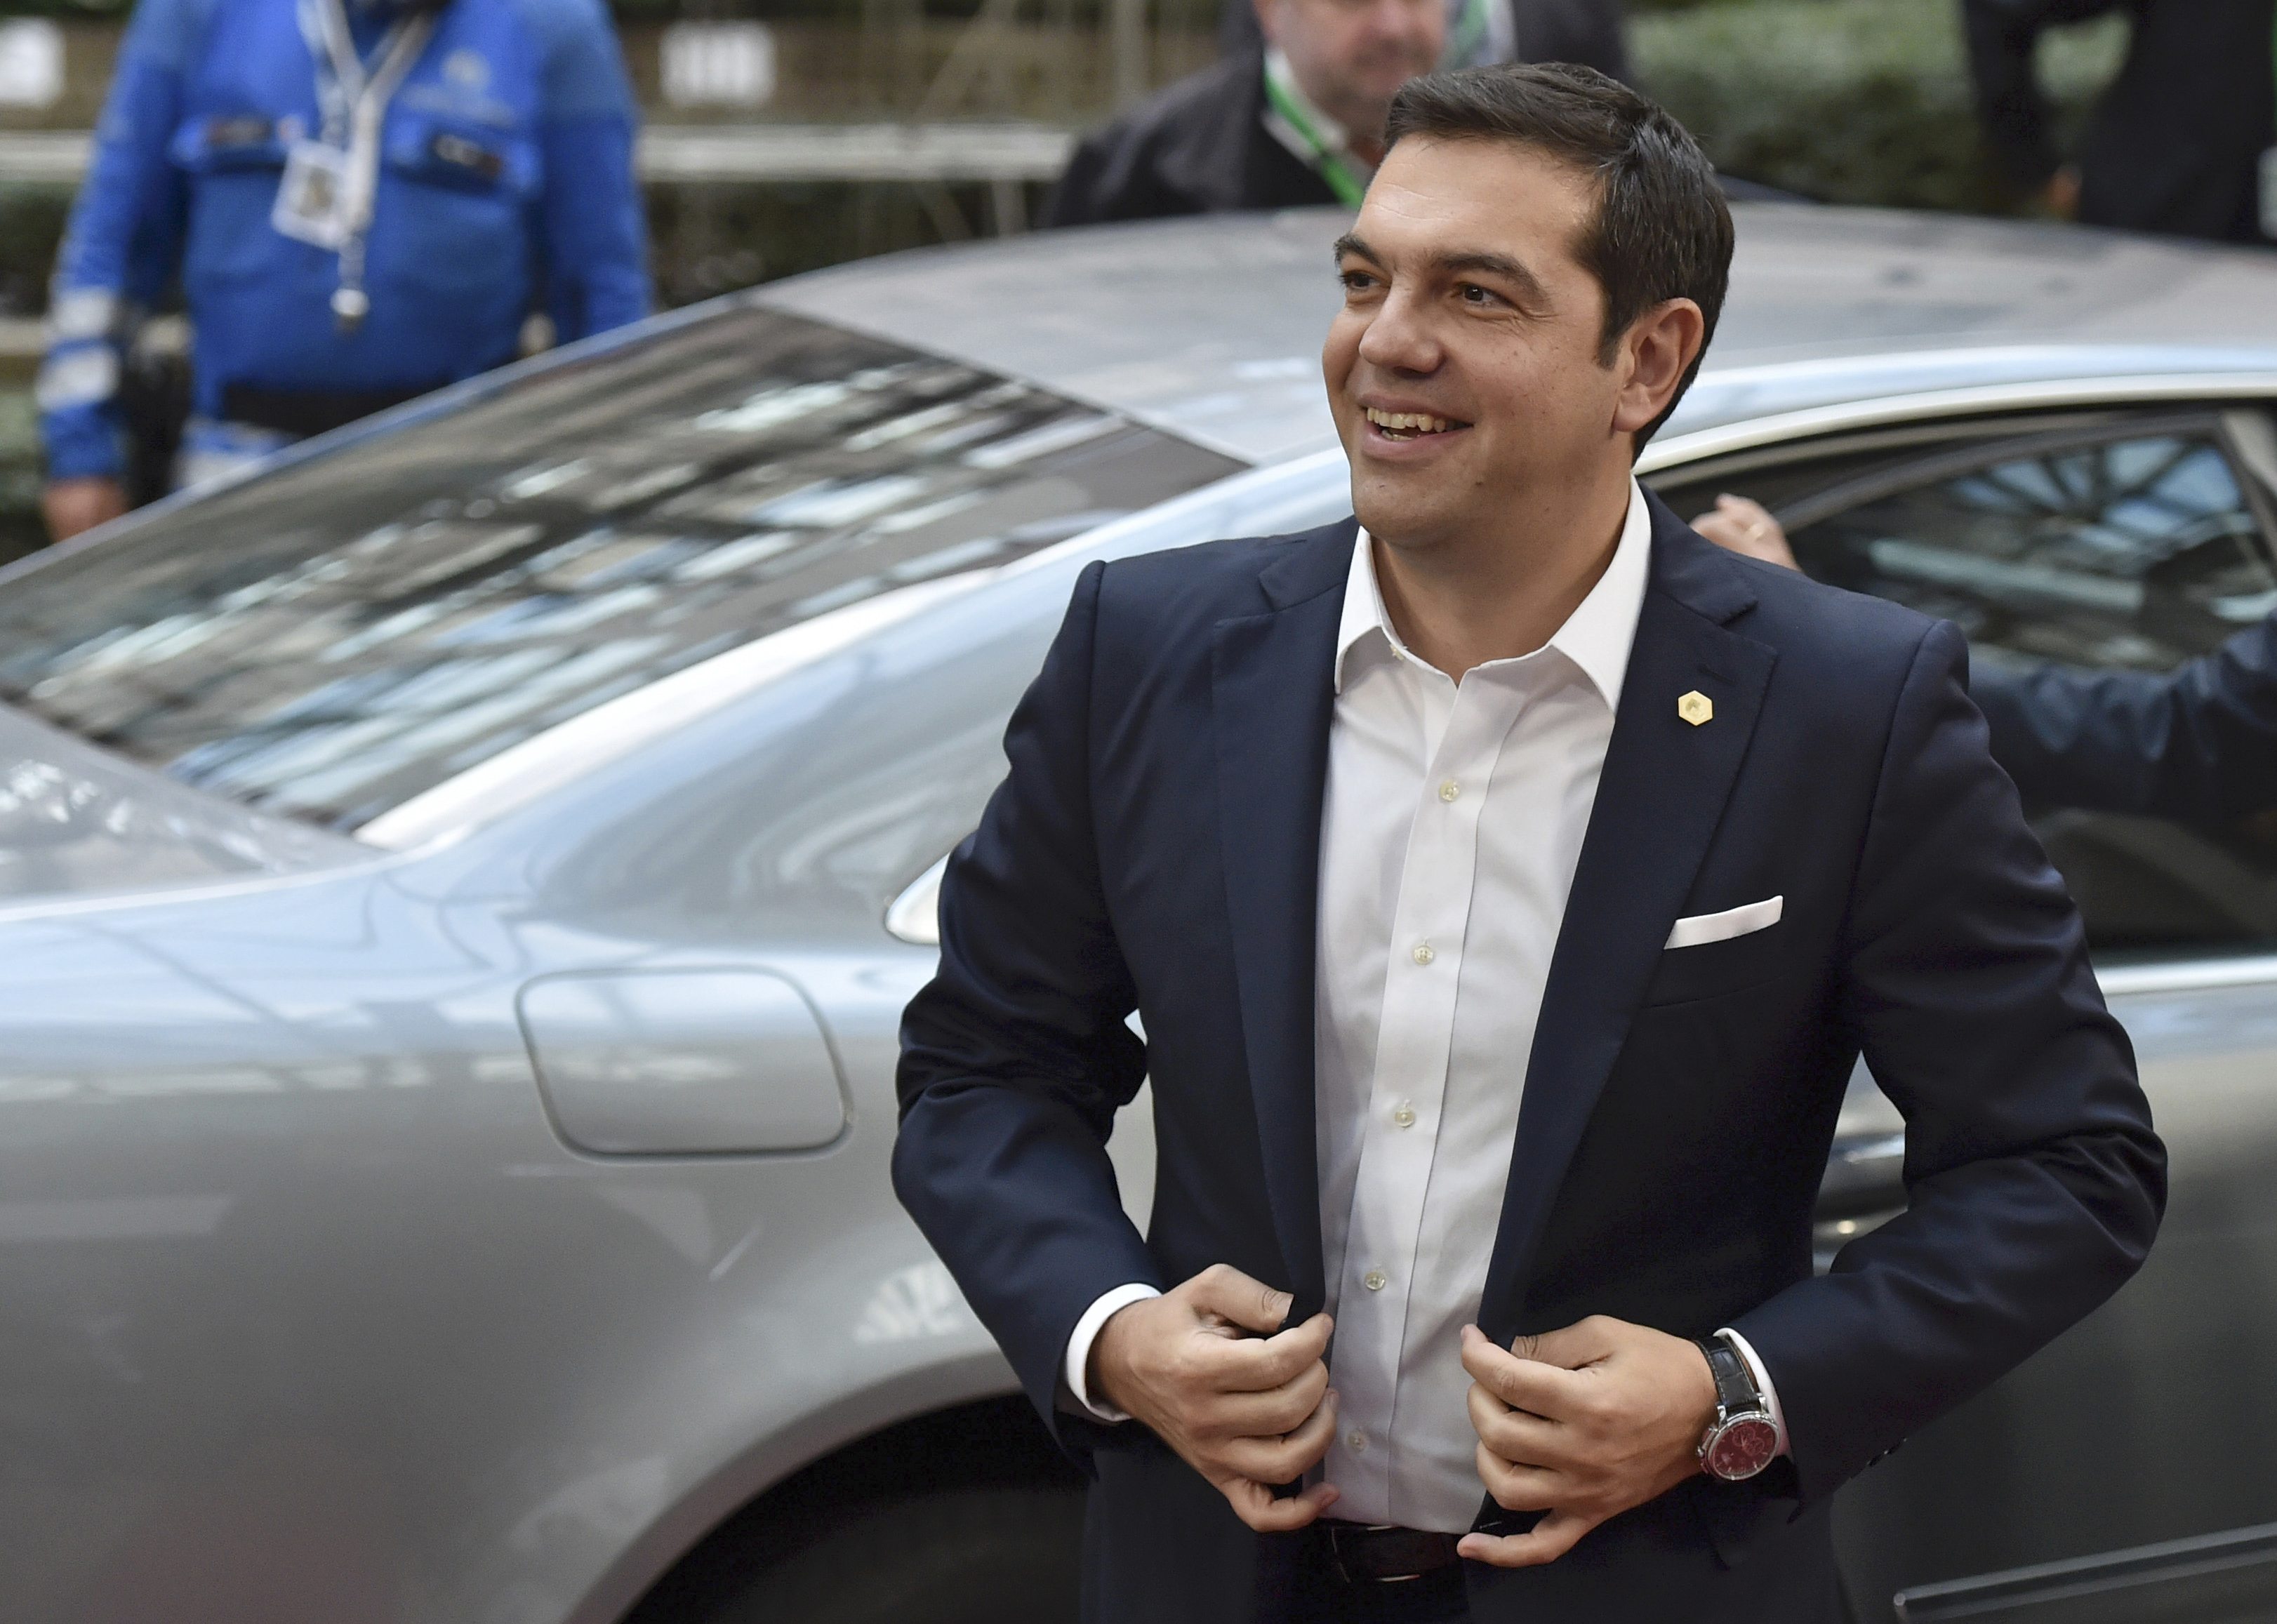 Greek Prime Minister Alexis Tsipras arrives at a European Union leaders extraordinary summit on the migrant crisis, in Brussels, Belgium September 23, 2015. European Union leaders meet for an extraordinary summit dedicated to tackling the arrival of hundreds of thousands of migrants and refugees from the Middle East, Africa and Asia on Europe's shores.              REUTERS/Eric Vidal